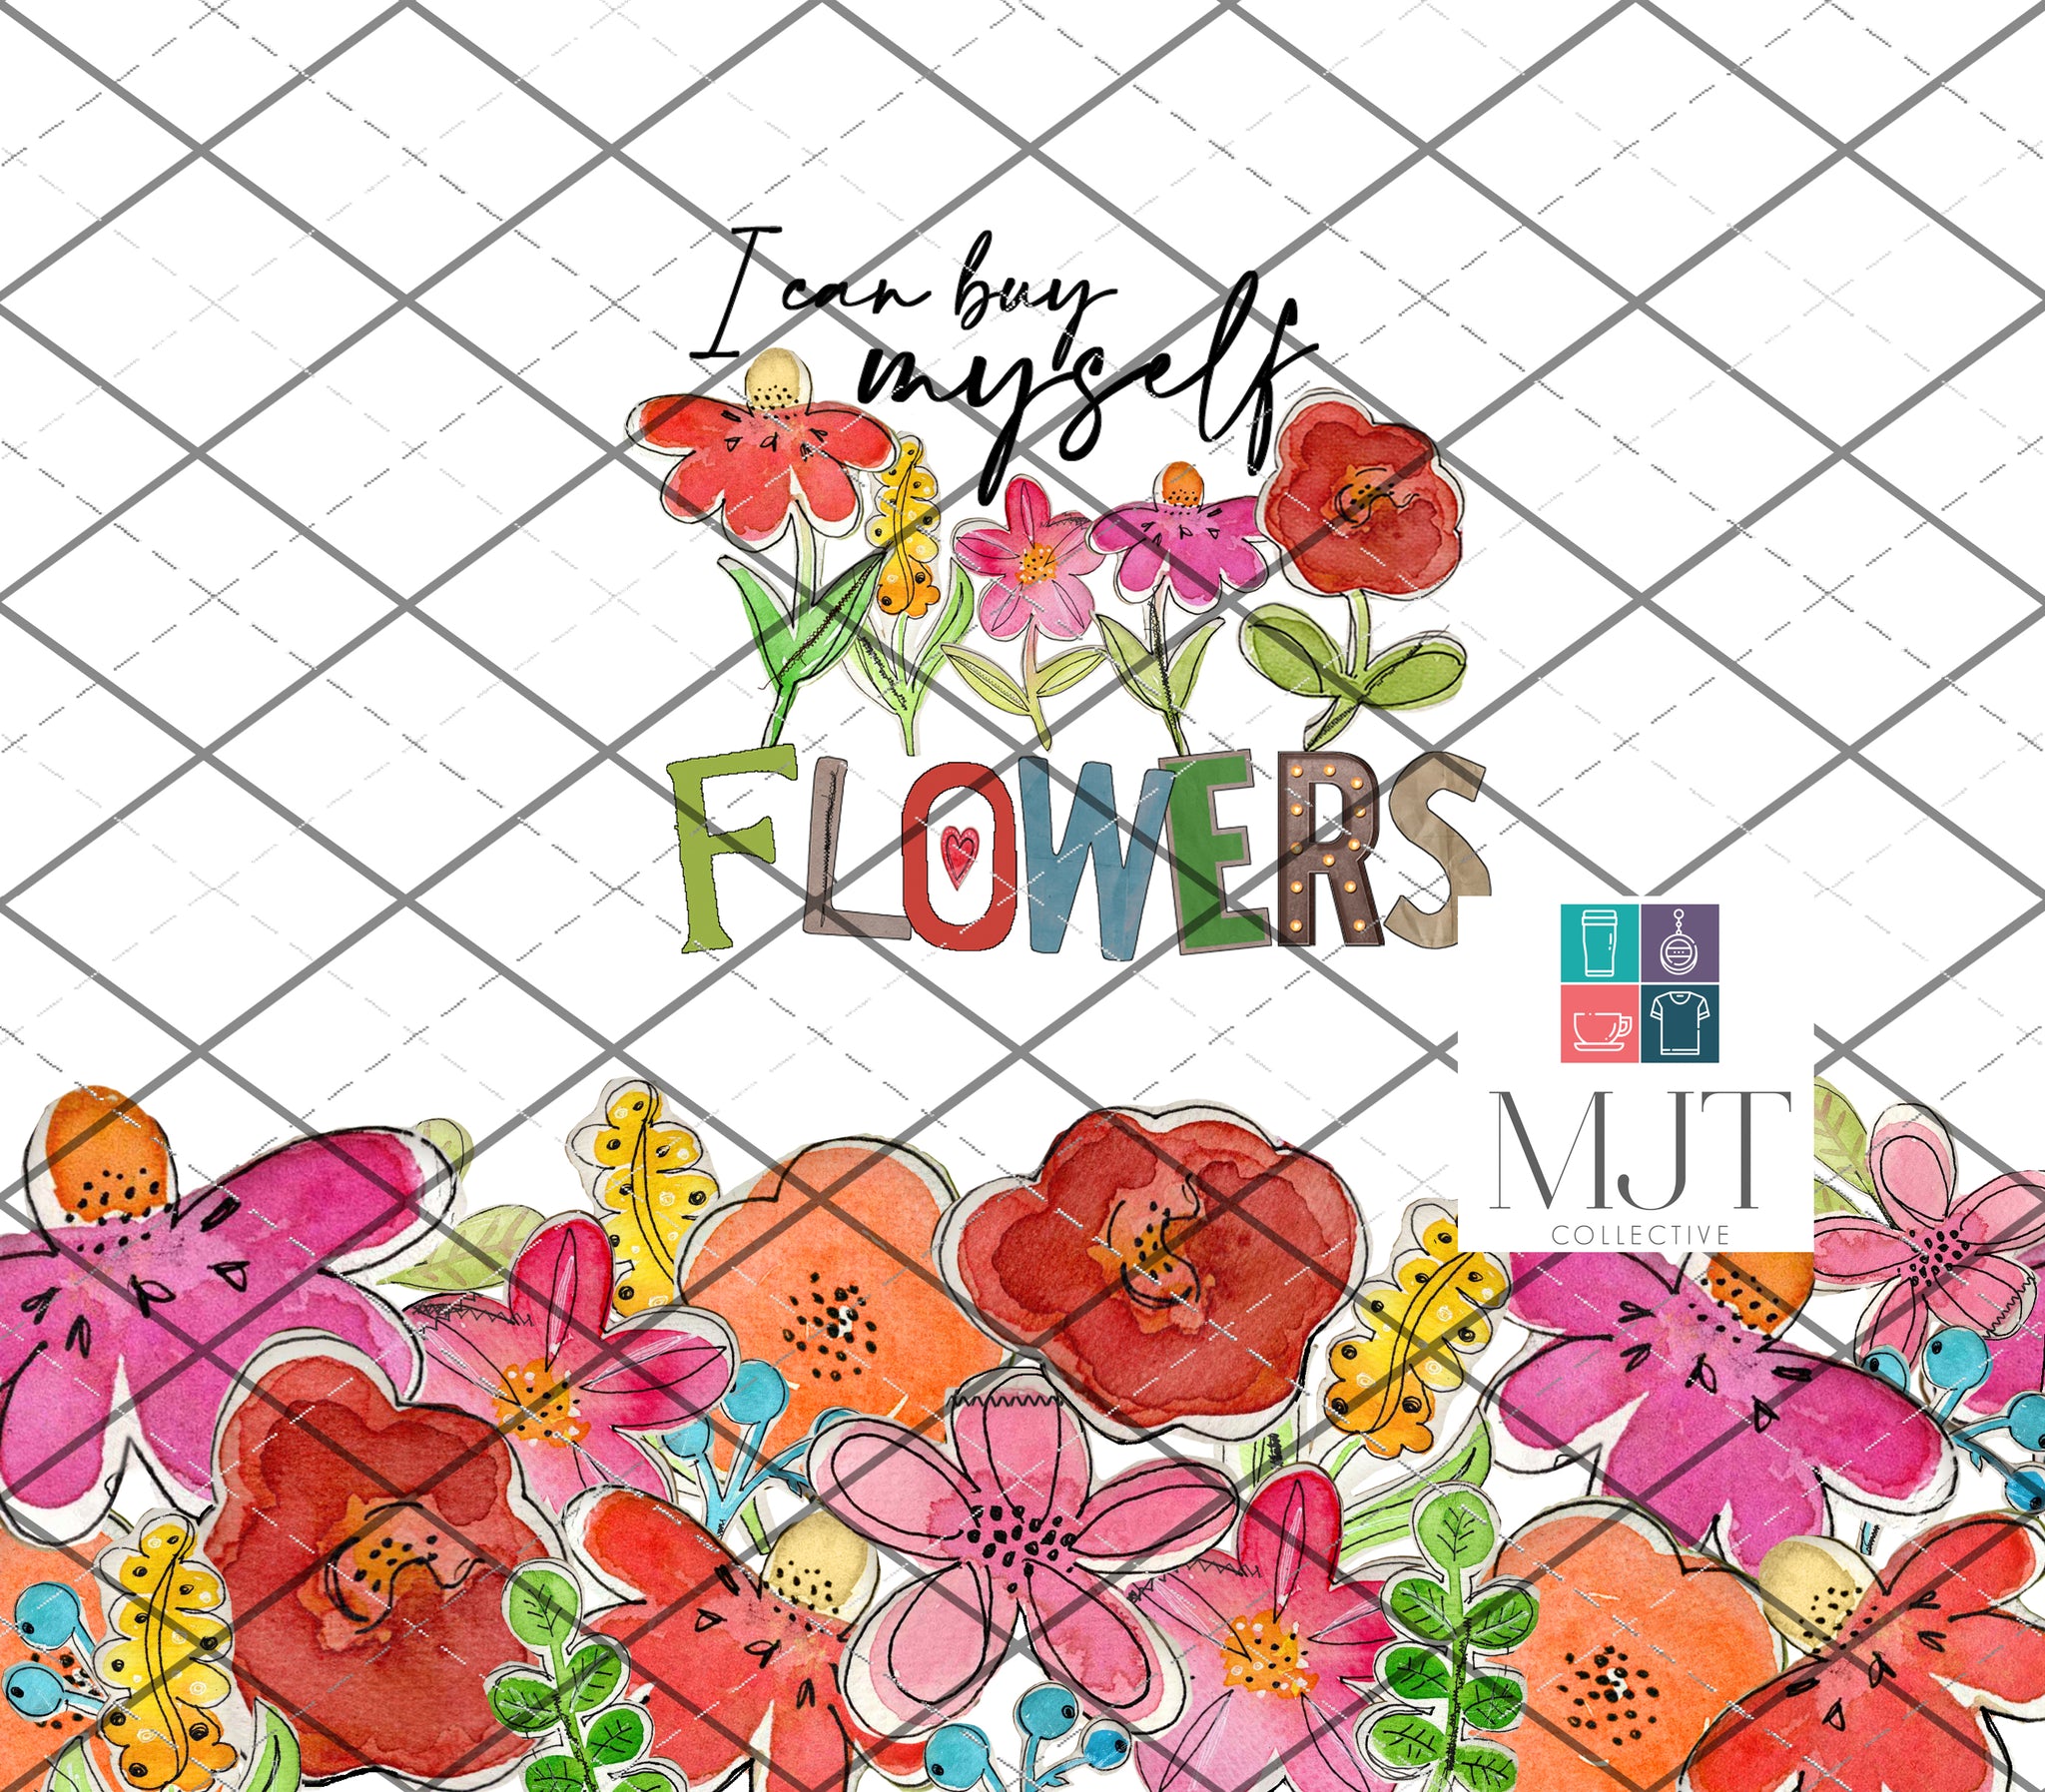 Copy of I can buy myself flowers full wrap - PNG File